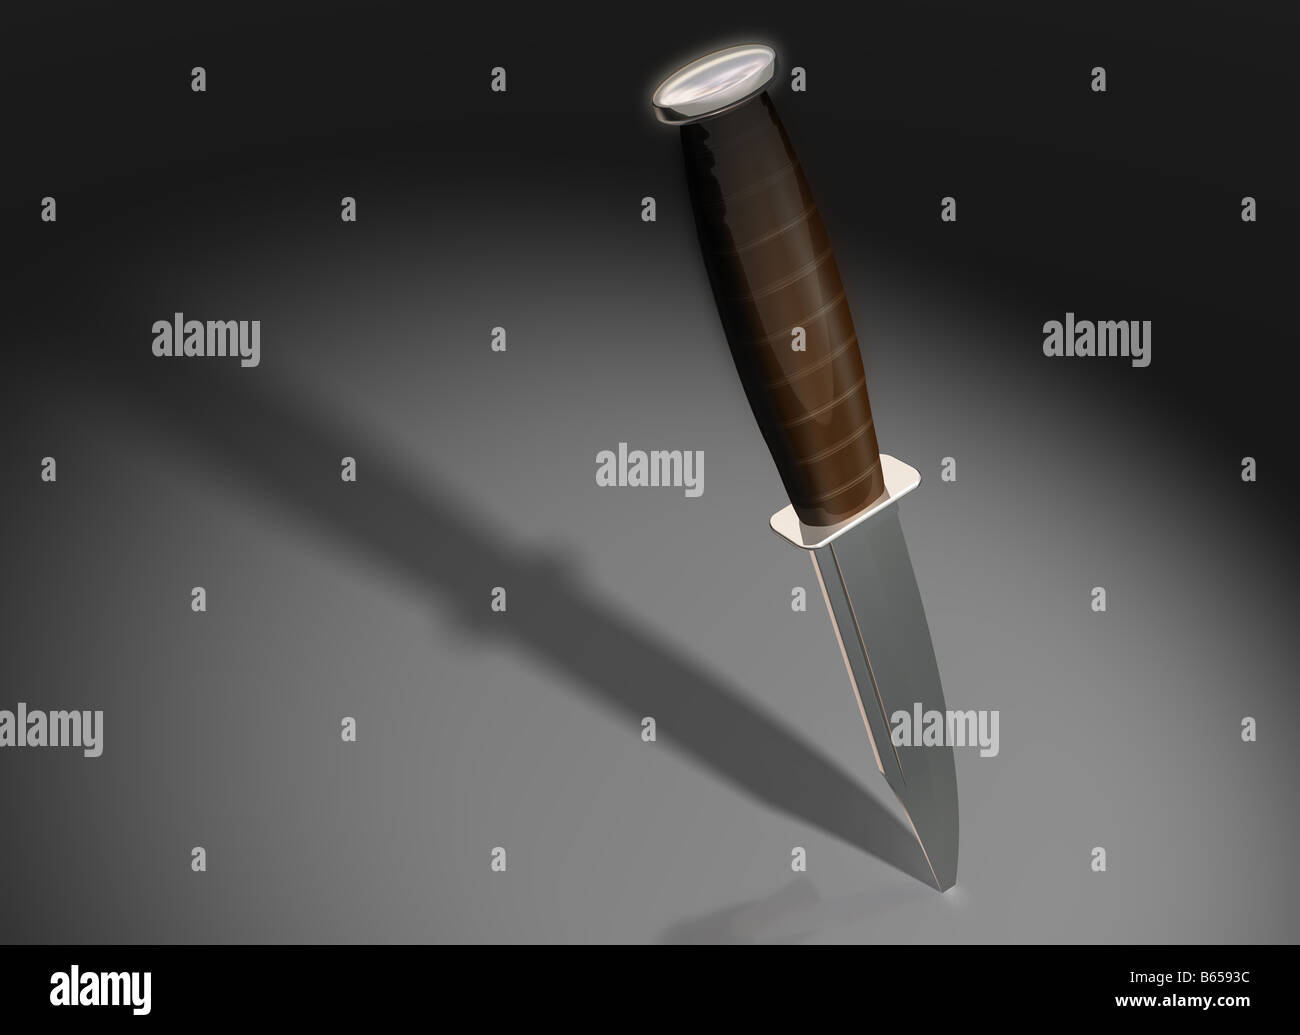 Illustration of a knife stuck into a surface Stock Photo